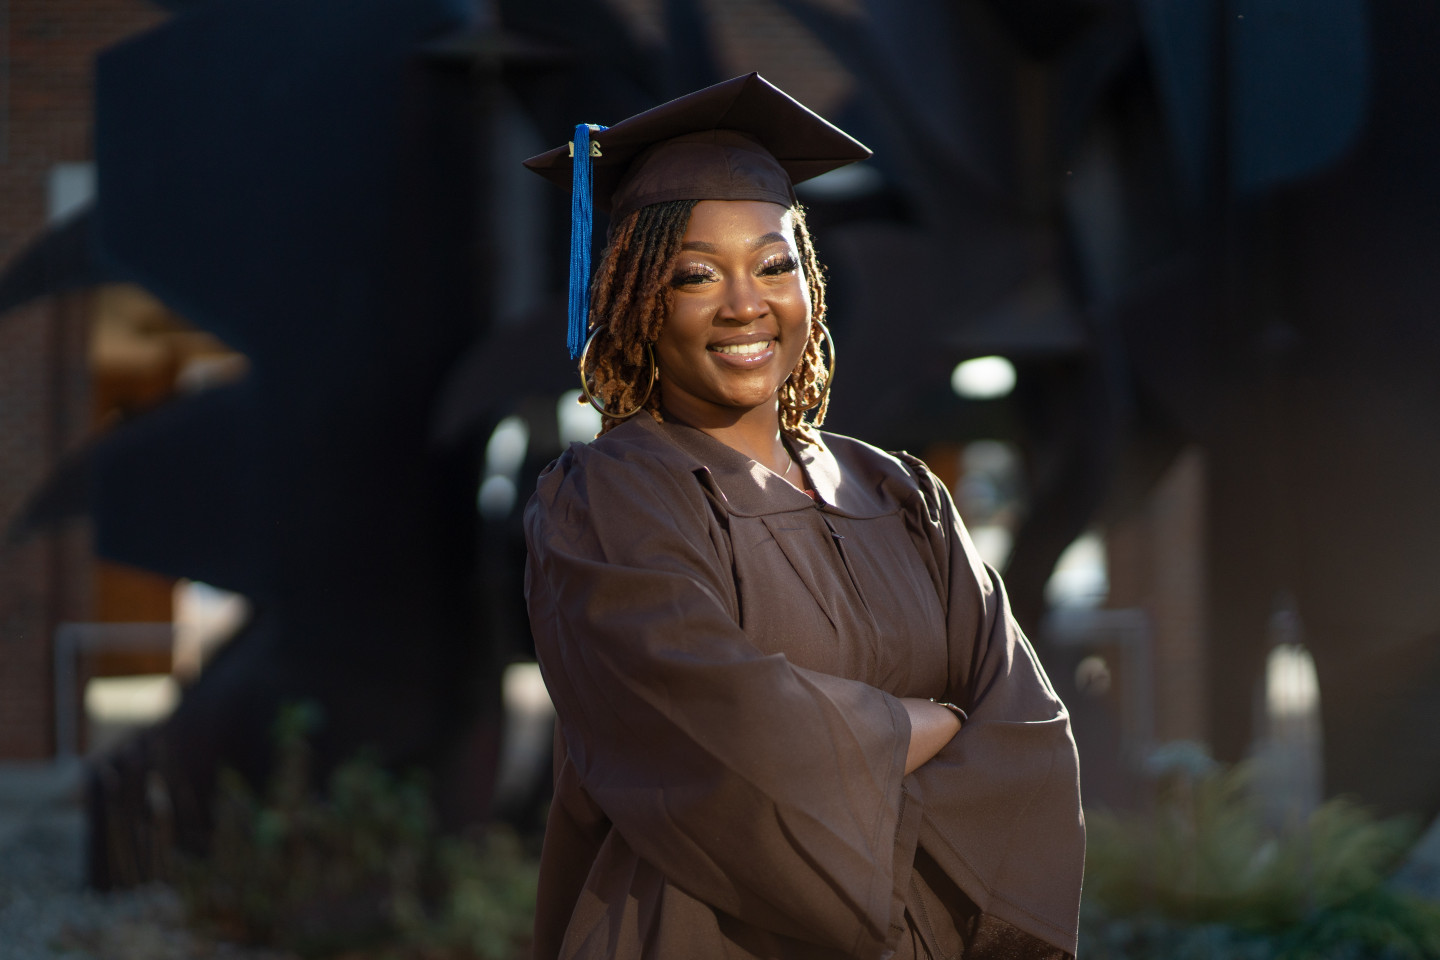 A portrait of Jamilah Anthony in her cap and gown.